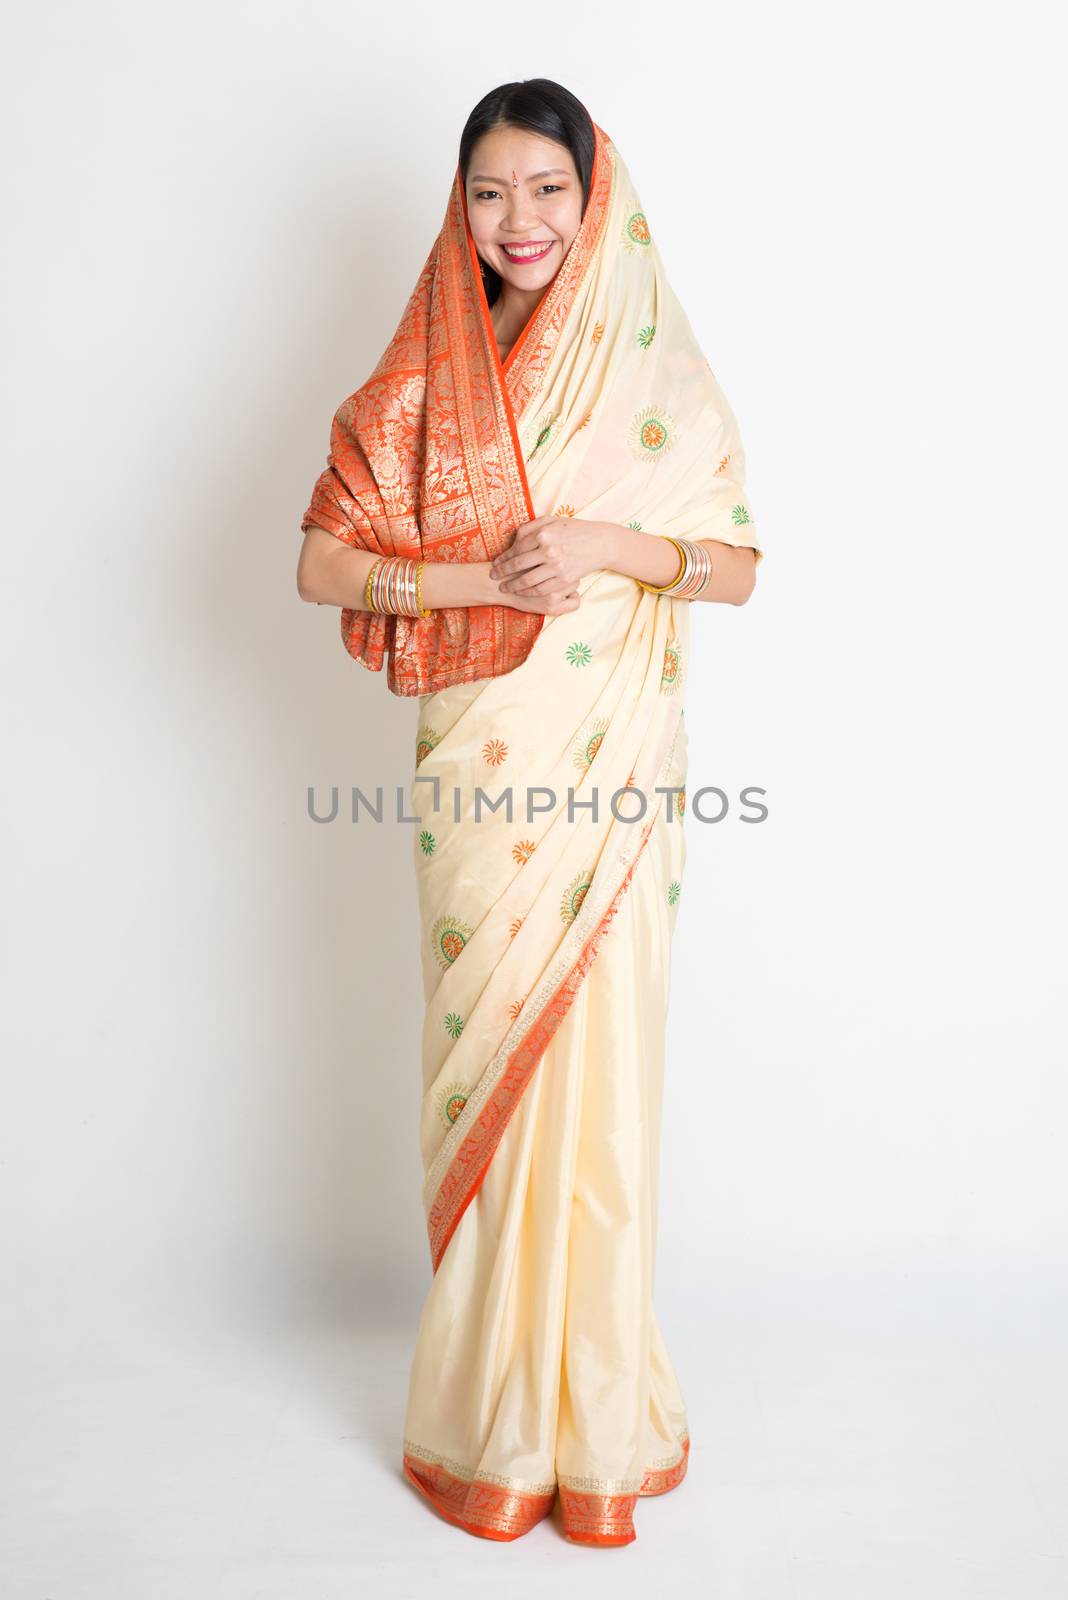 Portrait of young mixed race Indian Chinese woman in traditional sari dress smiling and looking at camera, full length on plain background.